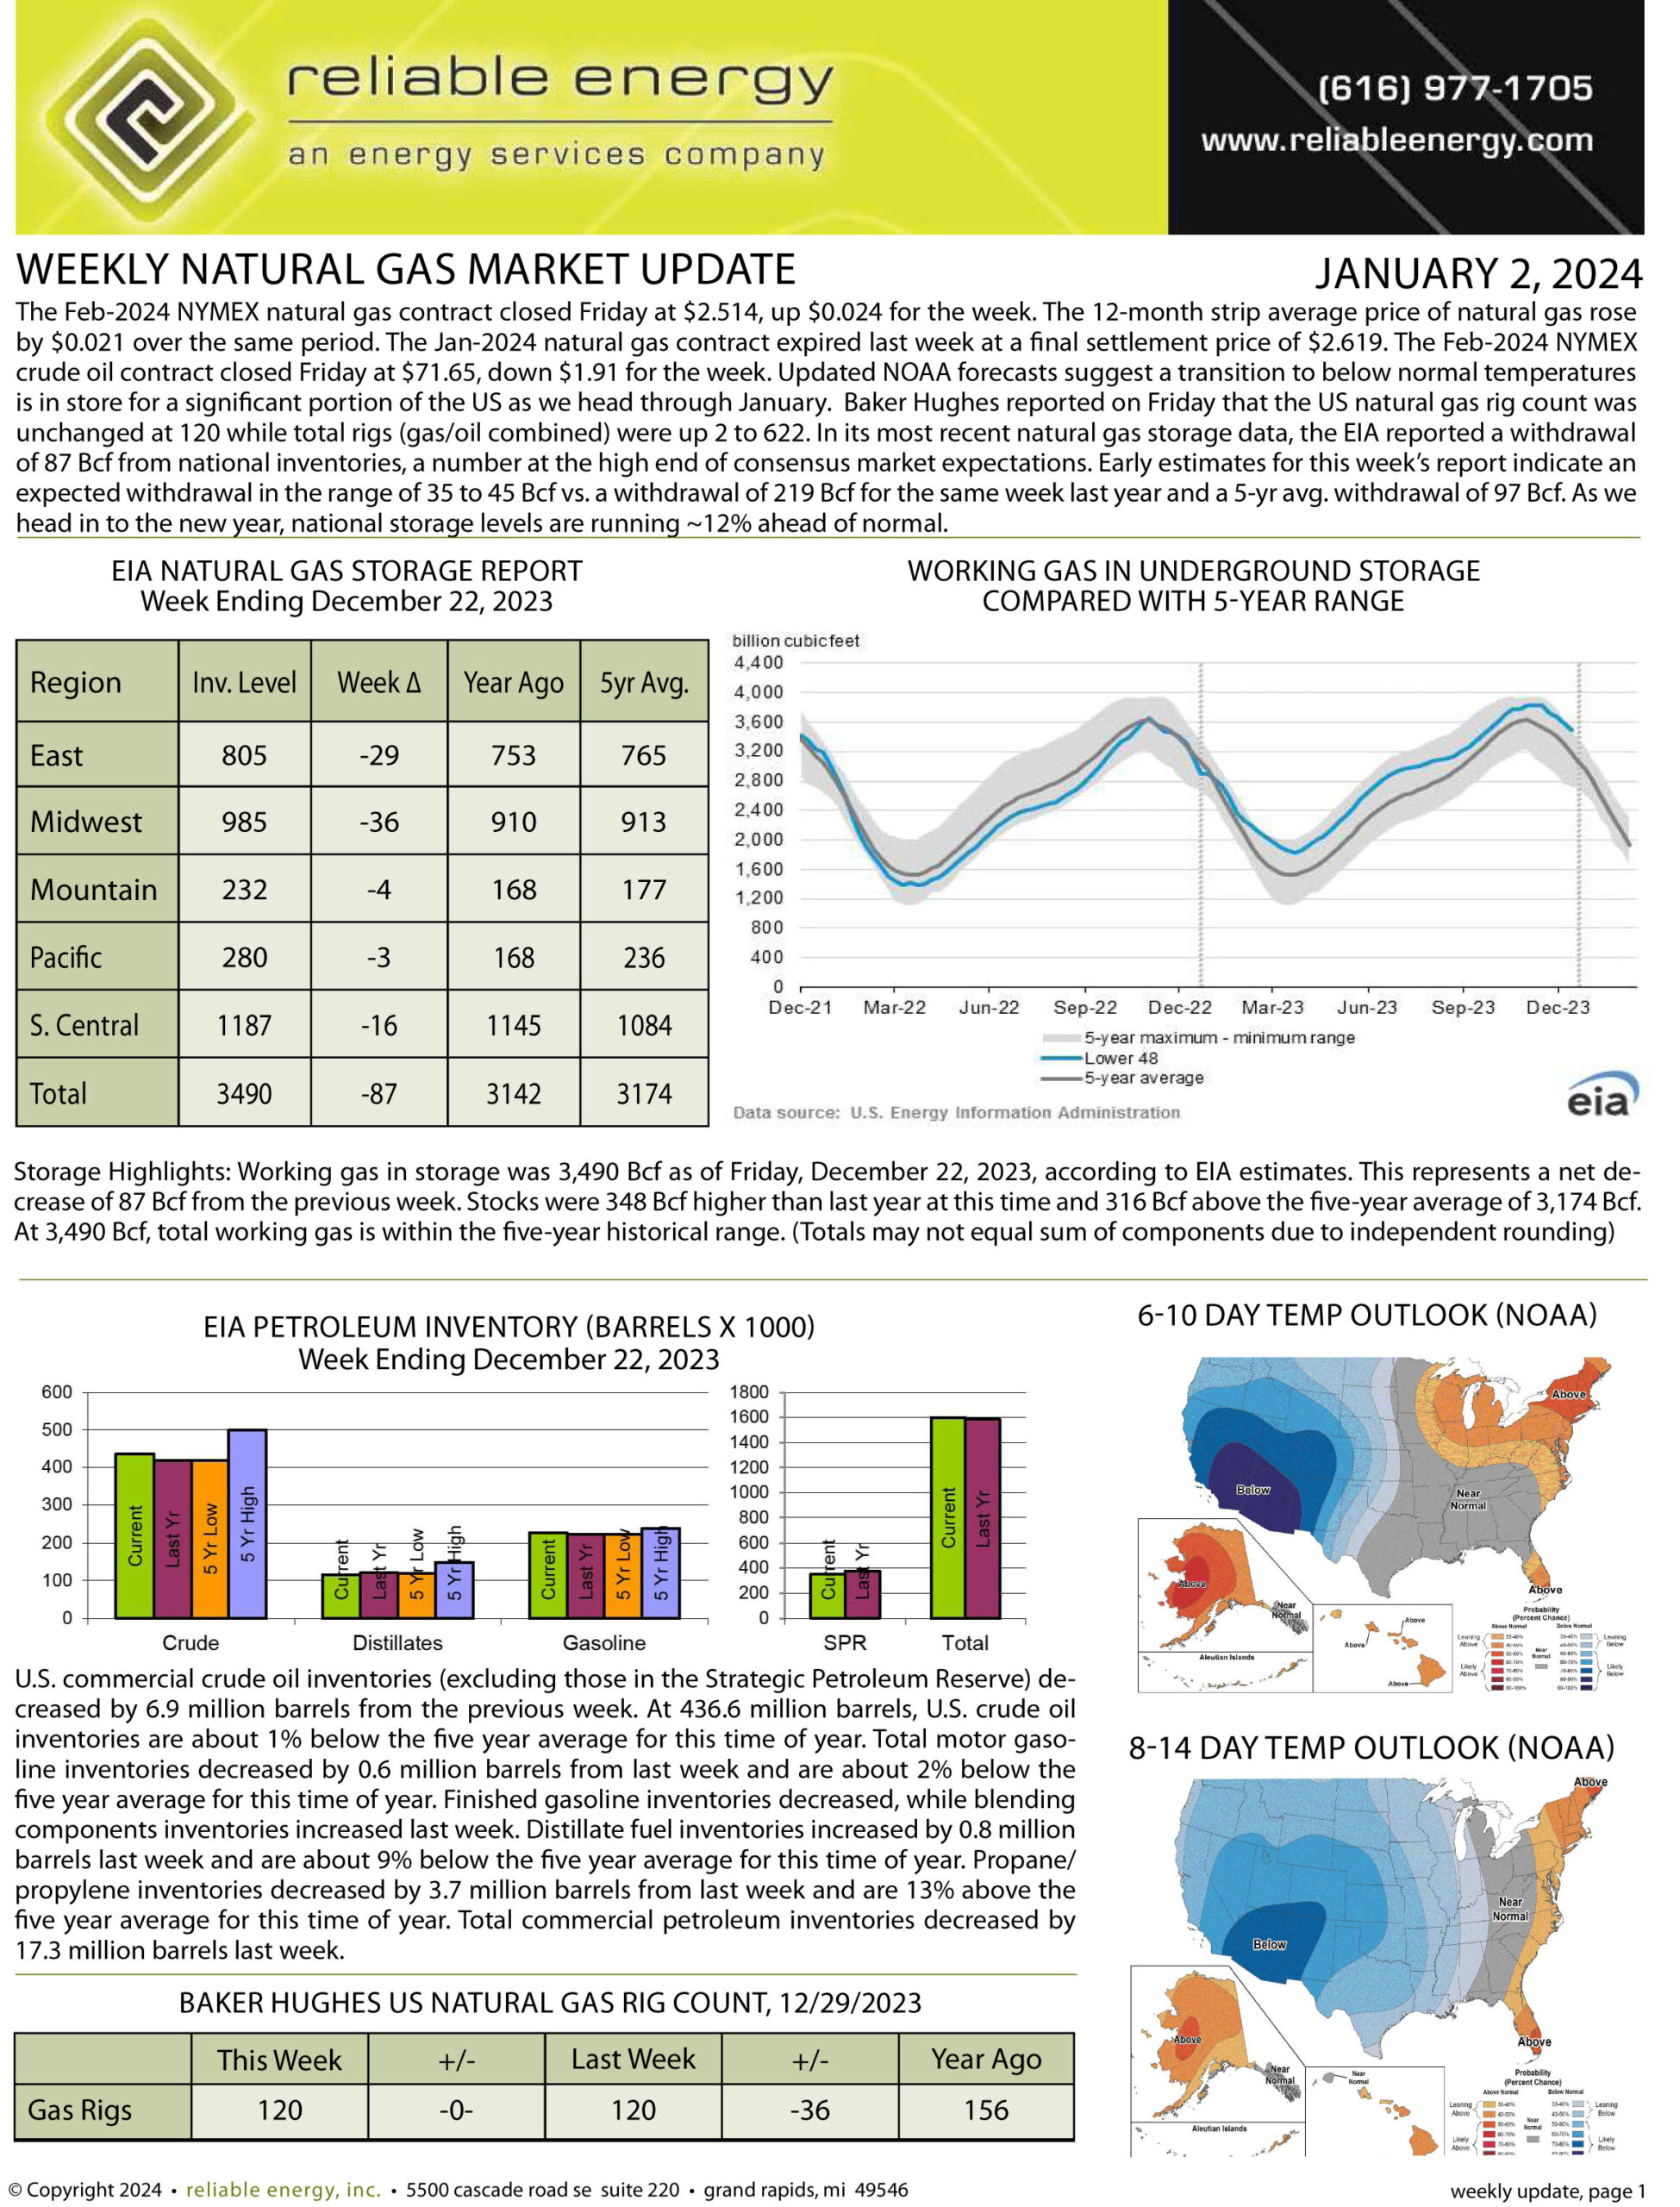 Natural Gas Market Update – January 2, 2024